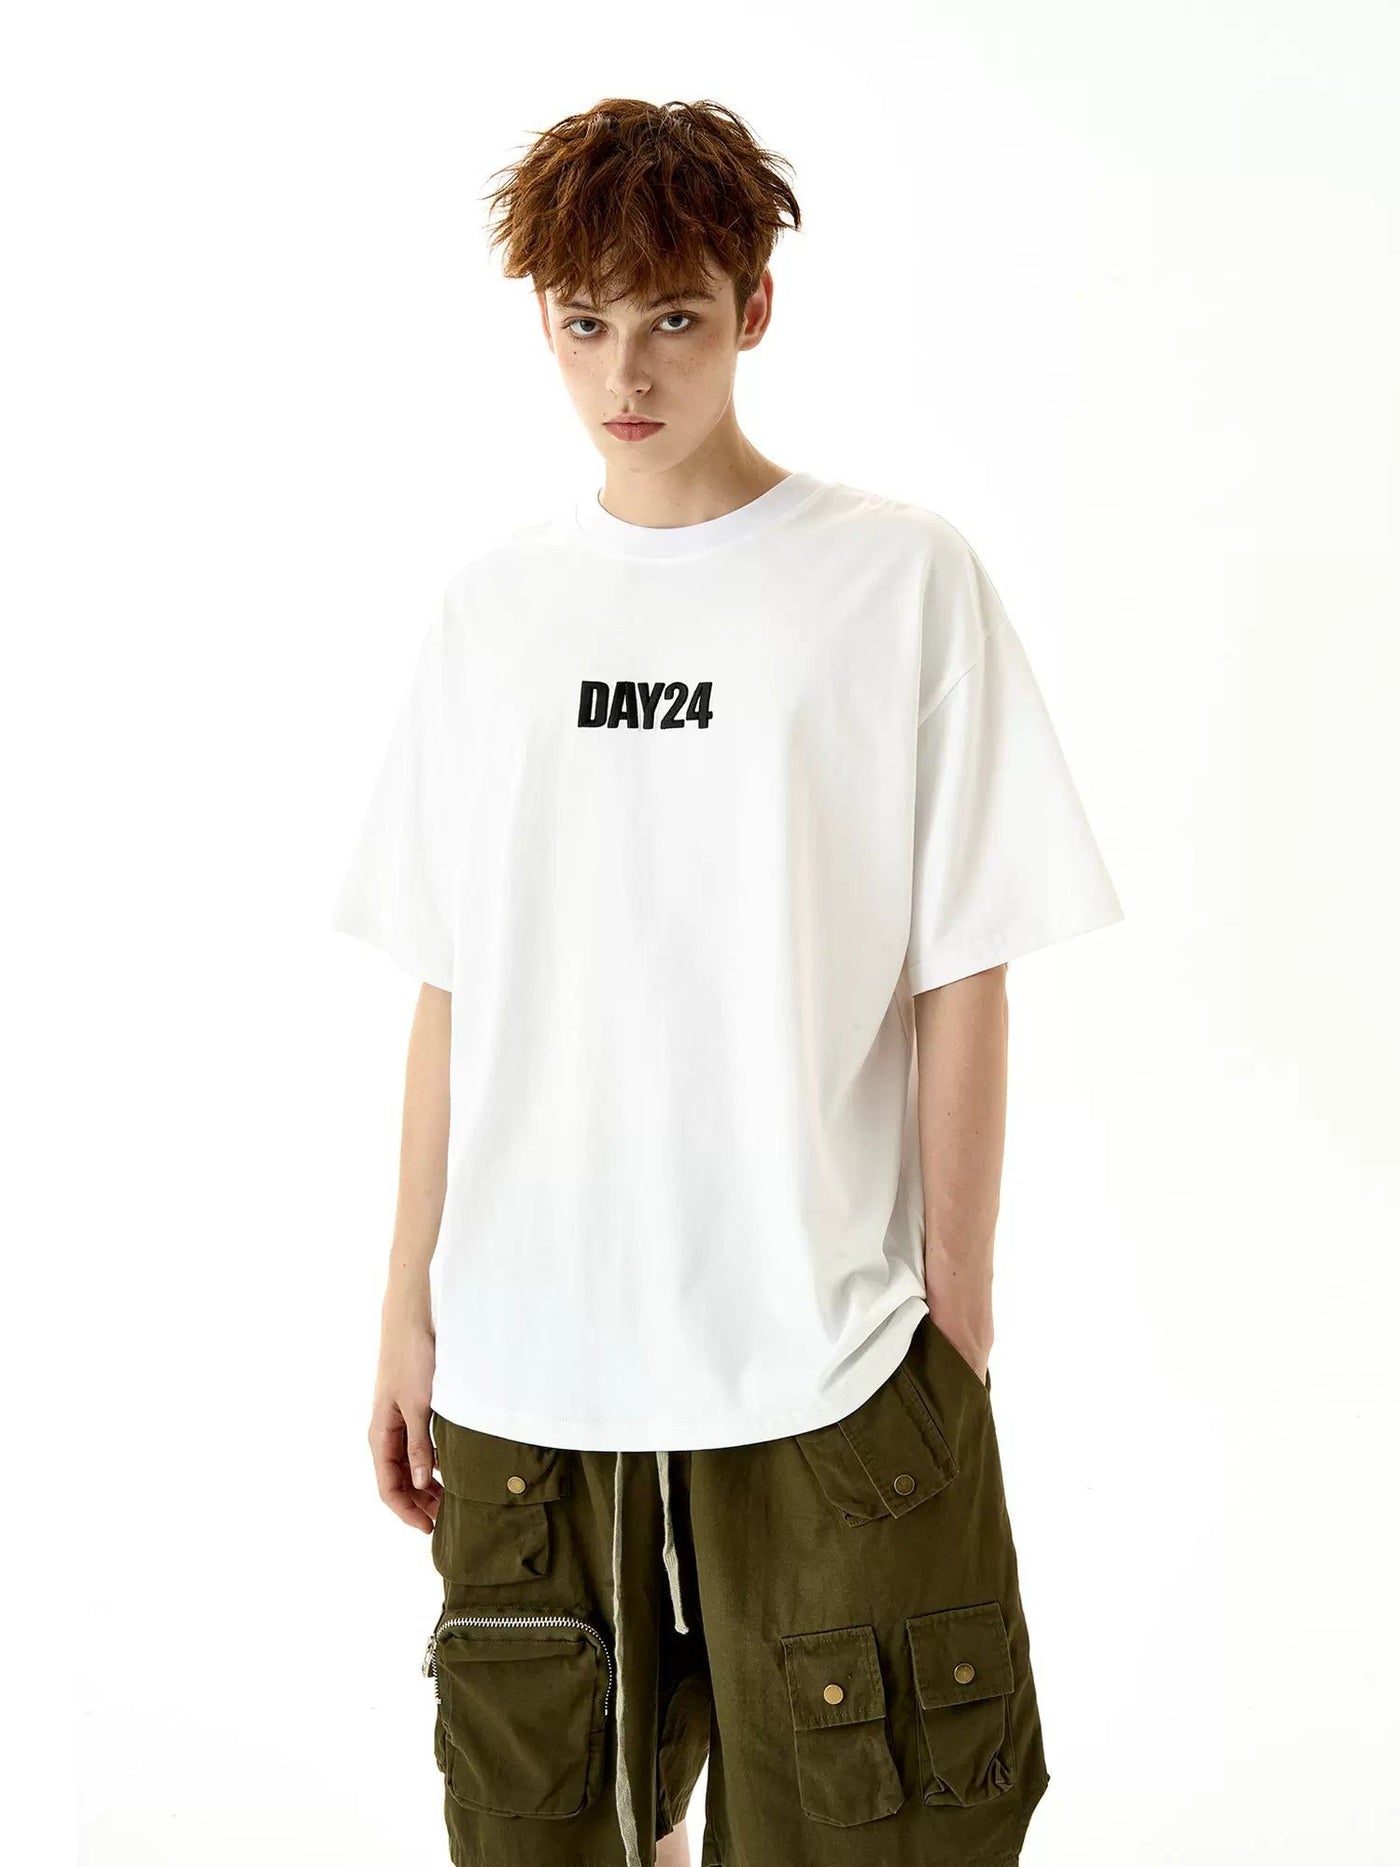 Day 24 Text Casual T-Shirt Korean Street Fashion T-Shirt By MaxDstr Shop Online at OH Vault